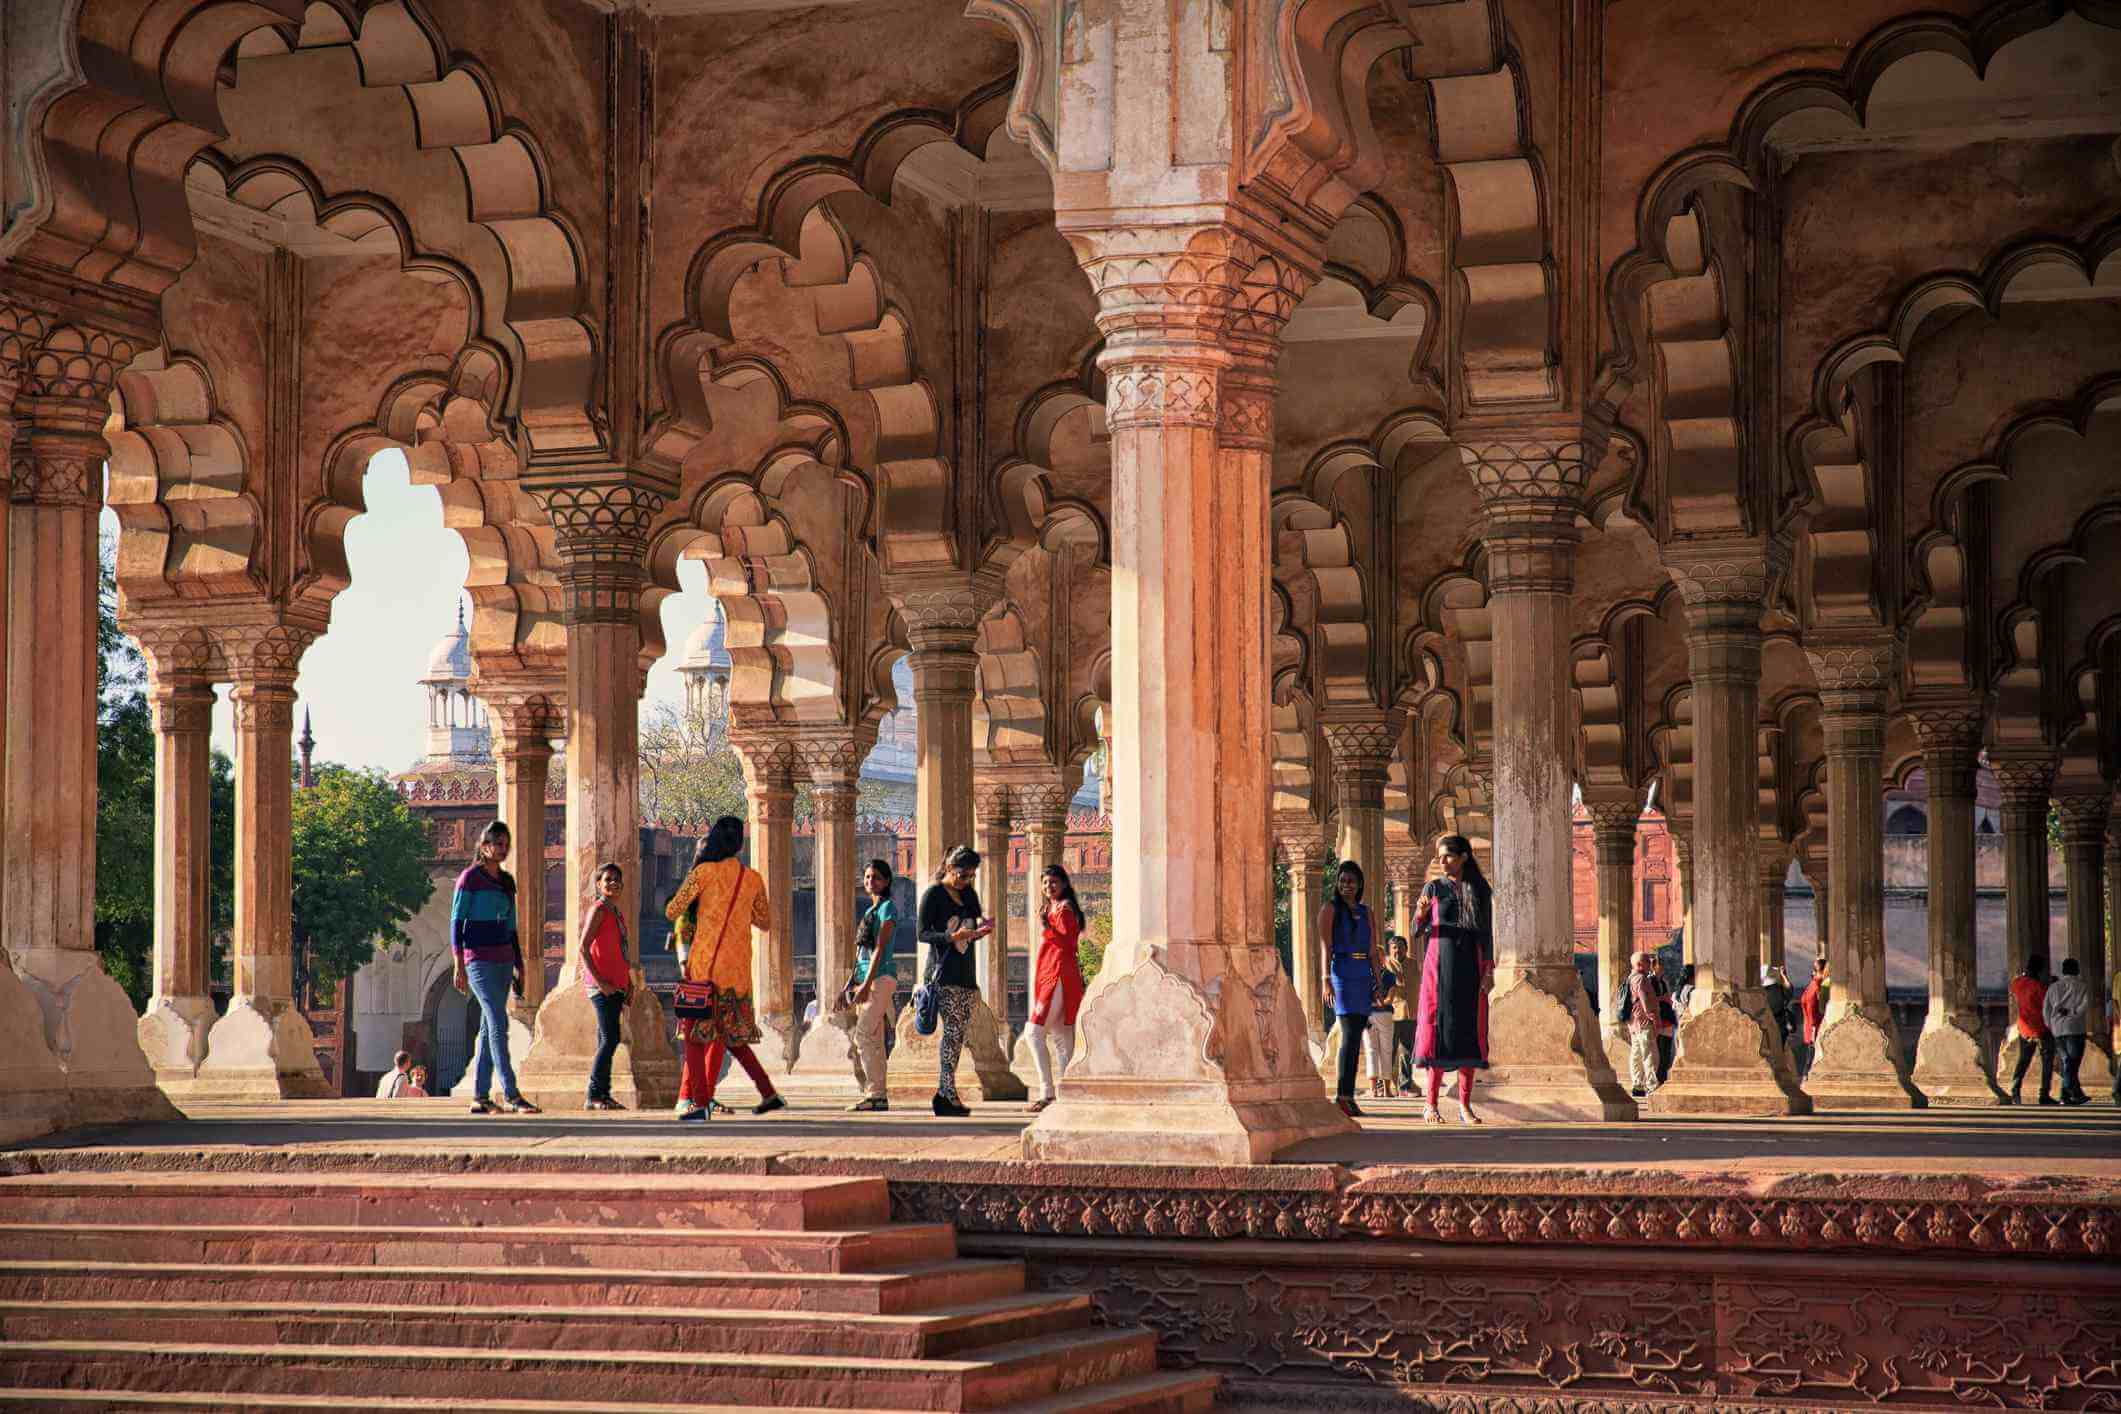 Architecture of Agra Fort